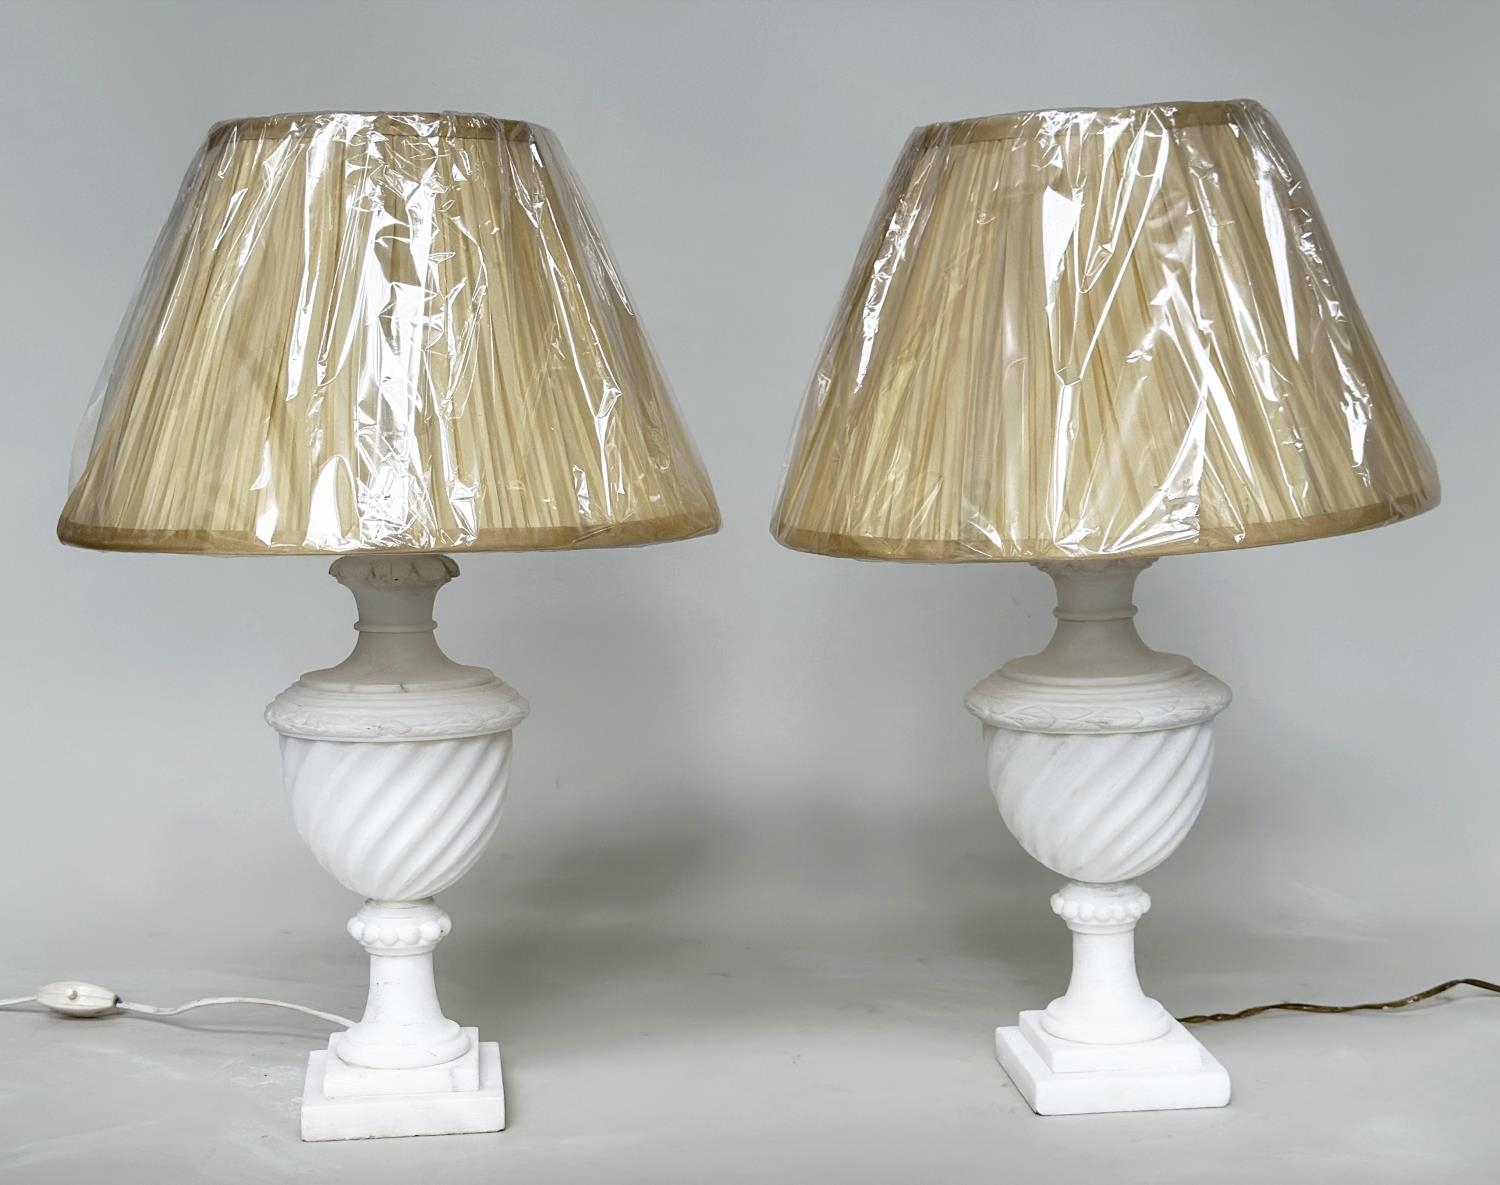 TABLE LAMPS, a pair, Italian alabaster of spiral urn form with stepped square bases and shades, 66cm - Image 3 of 5